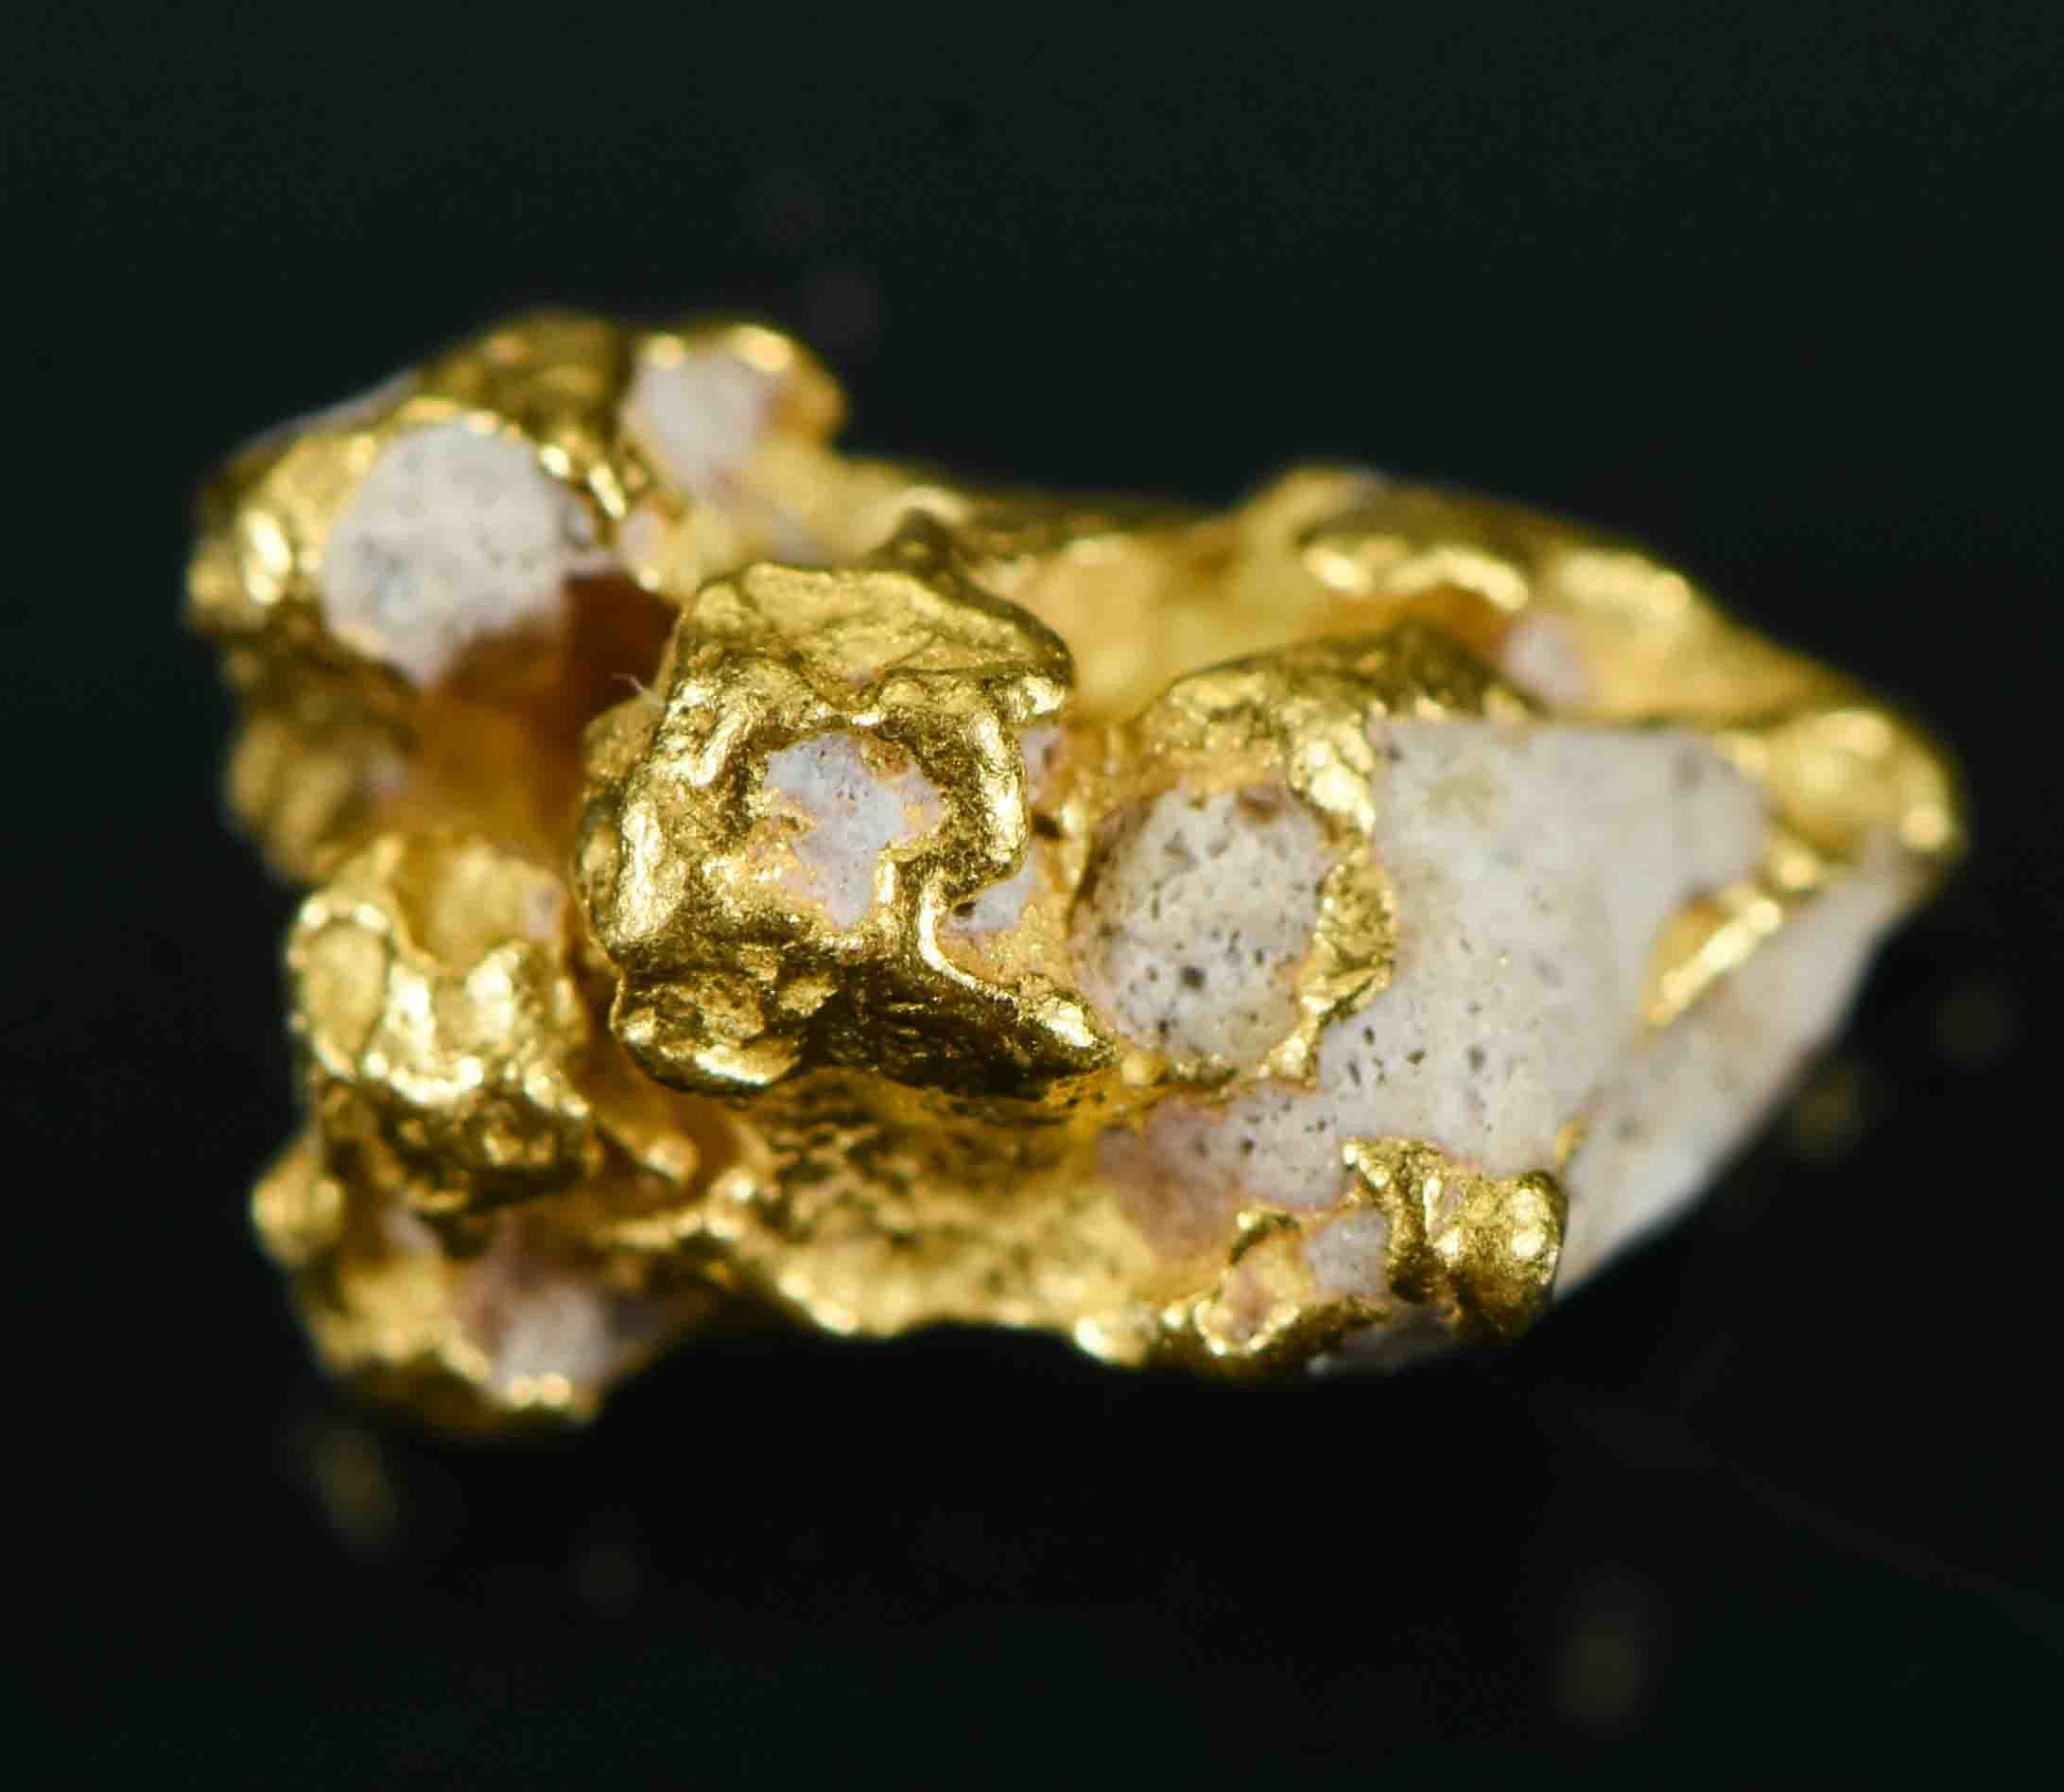 #33 Australian Natural Gold Nugget With Quartz Weighs 1.23 Grams.